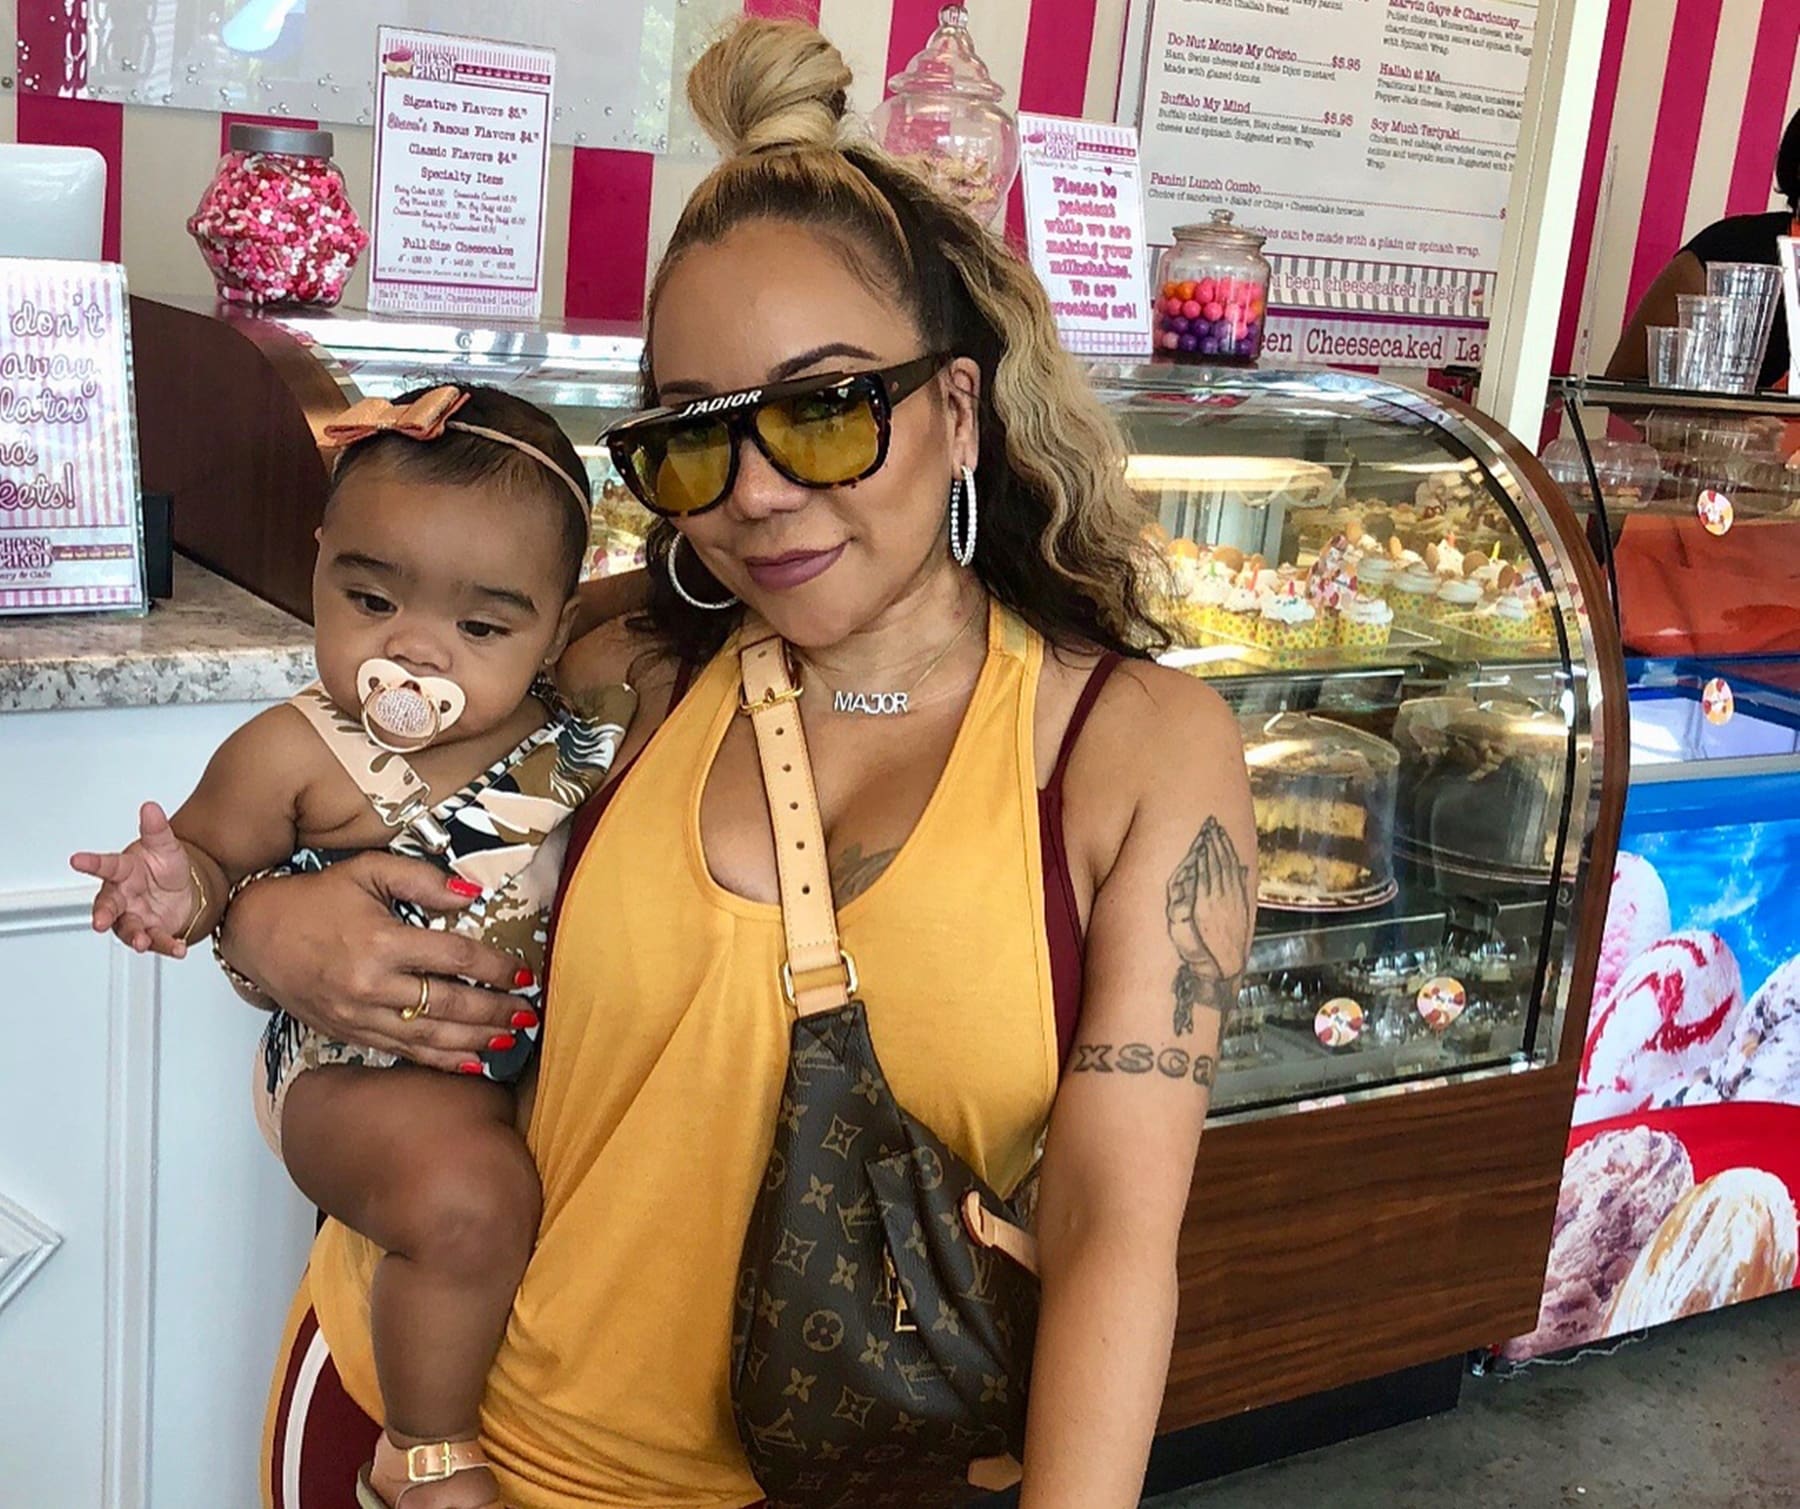 Tiny Harris And Toya Wright's Daughters, Heiress And Reigny Are A Whole Mood In This Video - Check Out The Gorgeous Little Ladies